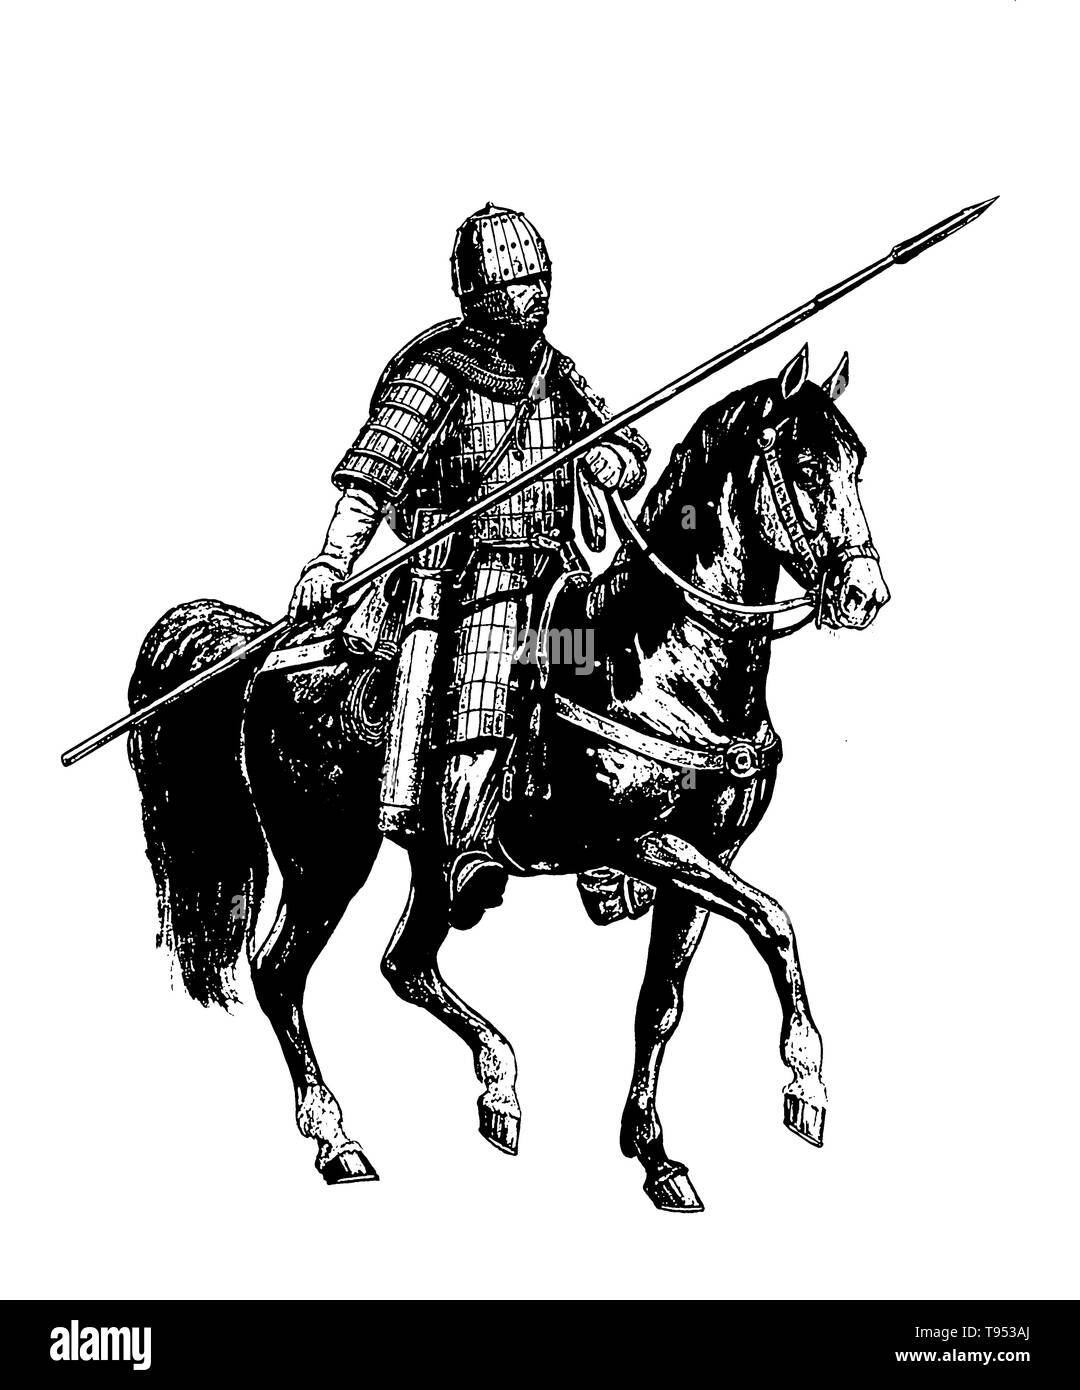 Mounted knight. Heavy armored magyar (hungarian) rider. Medieval cavalry illustration. Historical illustration. Stock Photo